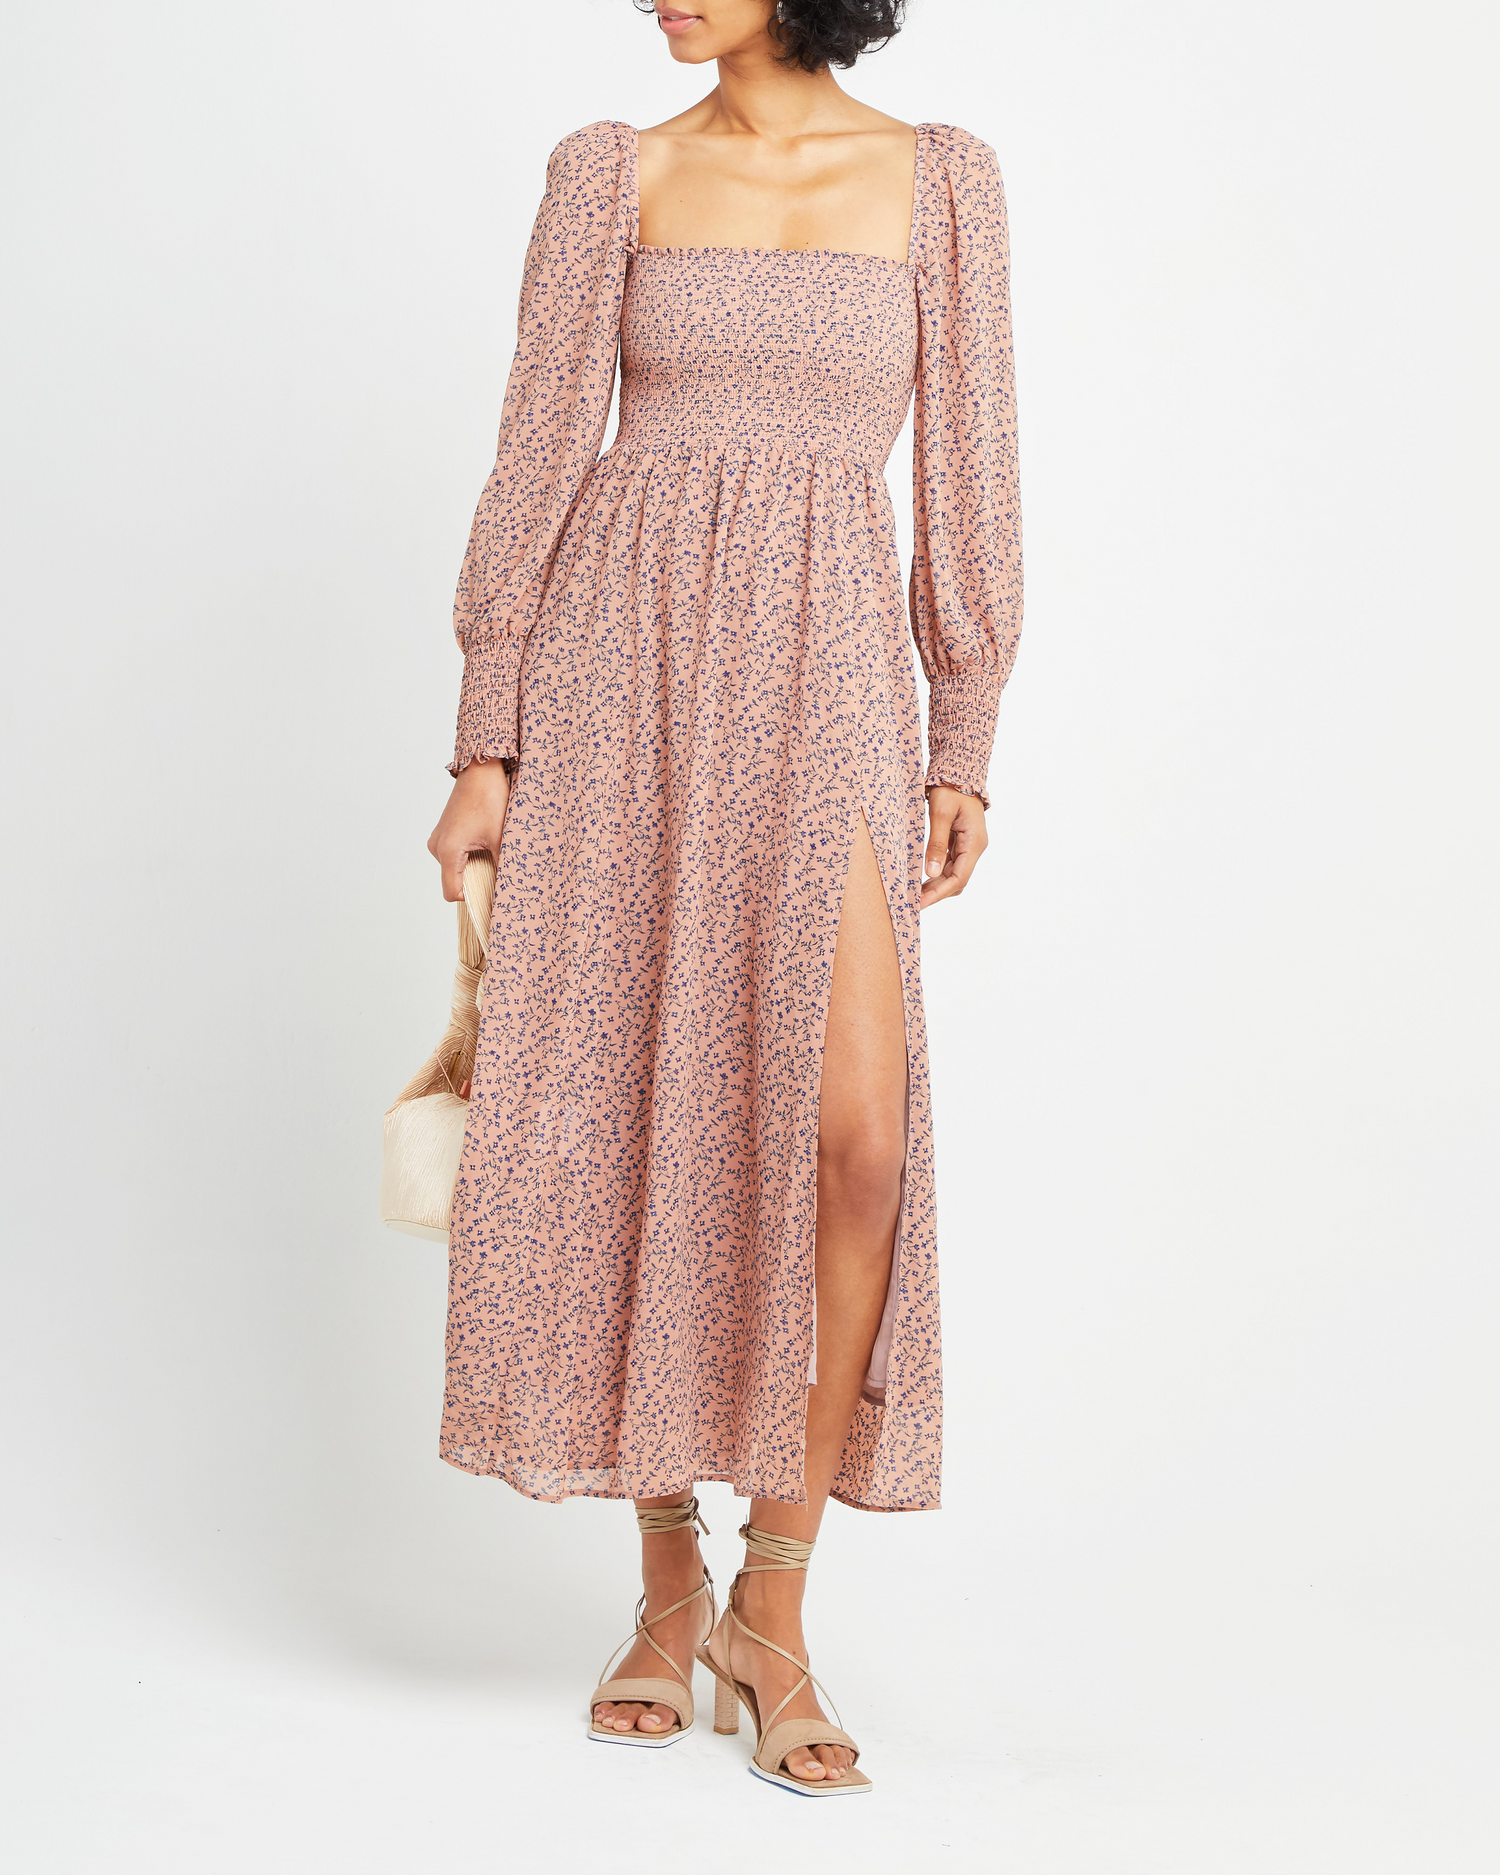 Fourth image of Classic Smocked Maxi Dress, a maxi dress, side slit, long, sheer sleeves, puff sleeves, square neckline, smocked bodice